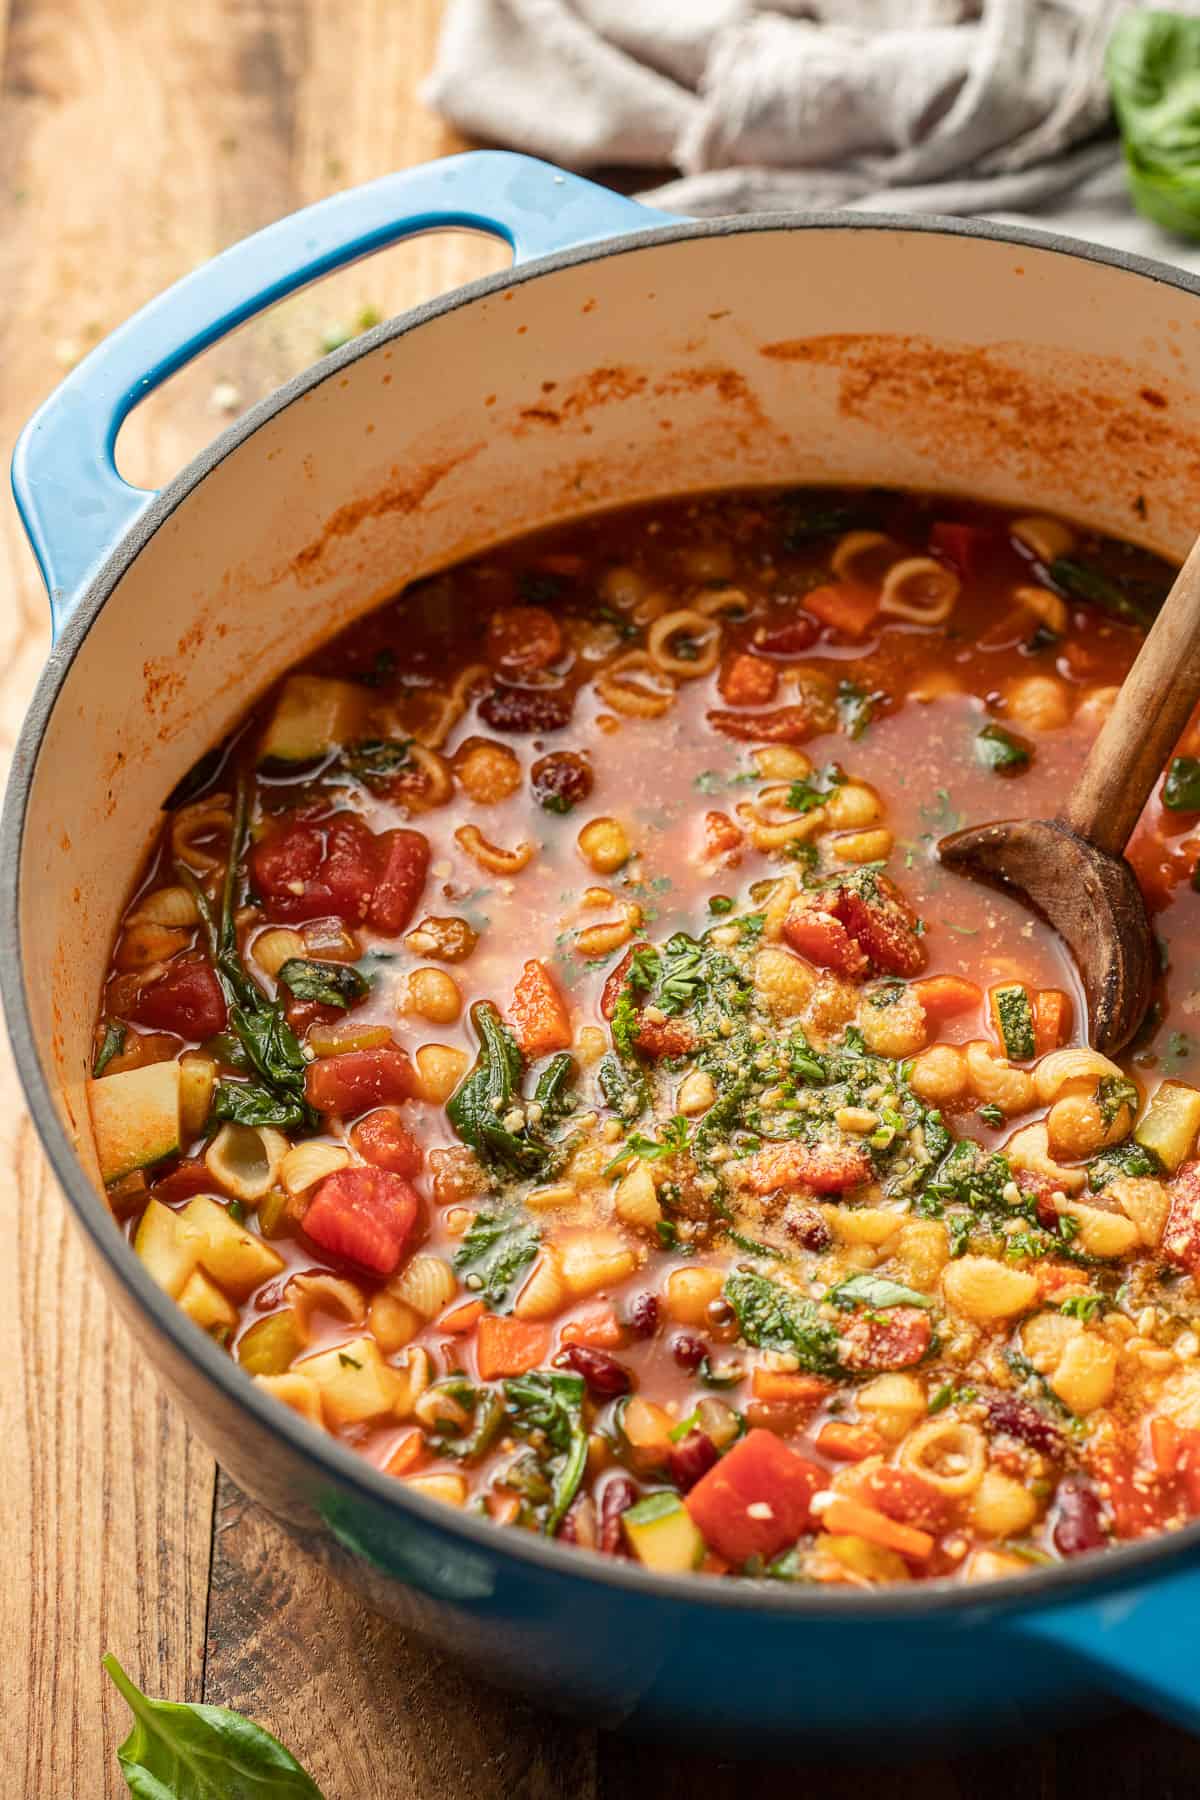 Pot of Vegan Minestrone Soup with a wooden spoon.